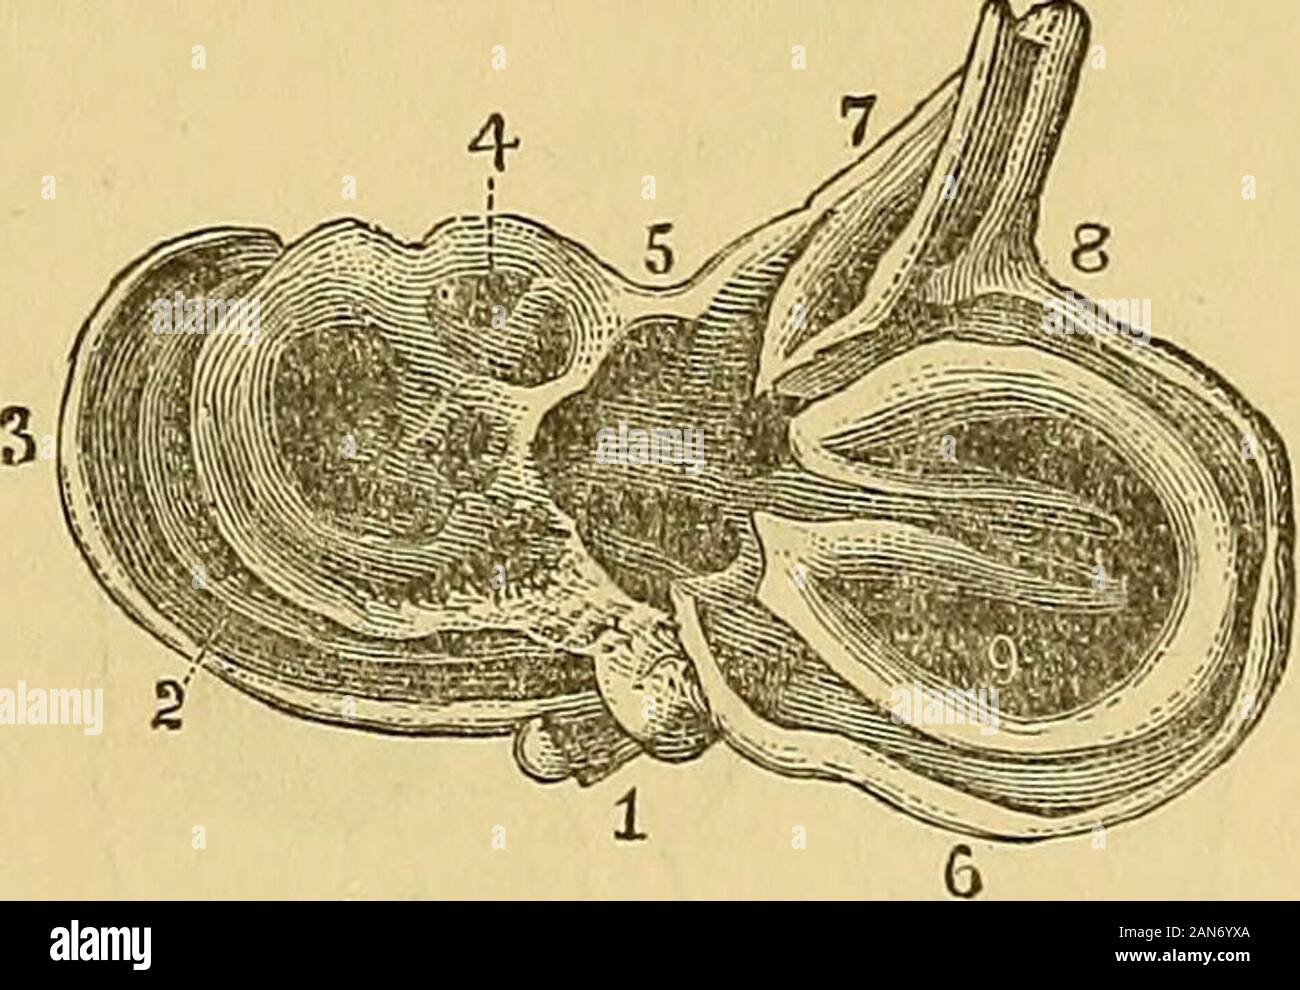 A practical treatise on the diseases of the ear including the anatomy of the organ . P, %j^/ Osseous OocMea and Semicircular Canals,with Stapes Bone. Left Ear of Adult.—After Rudinger. Bight Osseous Vestibule, Semicircular Ca-nals, Cochlea, and Ossicula Auditus ofNewly-born.—After Rudinger. tal 5mm. The part common (canalis communis) to the twovertical canals is from 2 to 3 millimetres in length. Thediameter in a grown man varies from 1.3 to 1.7 millimetres.Wharton Jones makes their caliber about one-twentieth of aninch in a direction from the concavity to the convexity of theircurve.. The Big Stock Photo